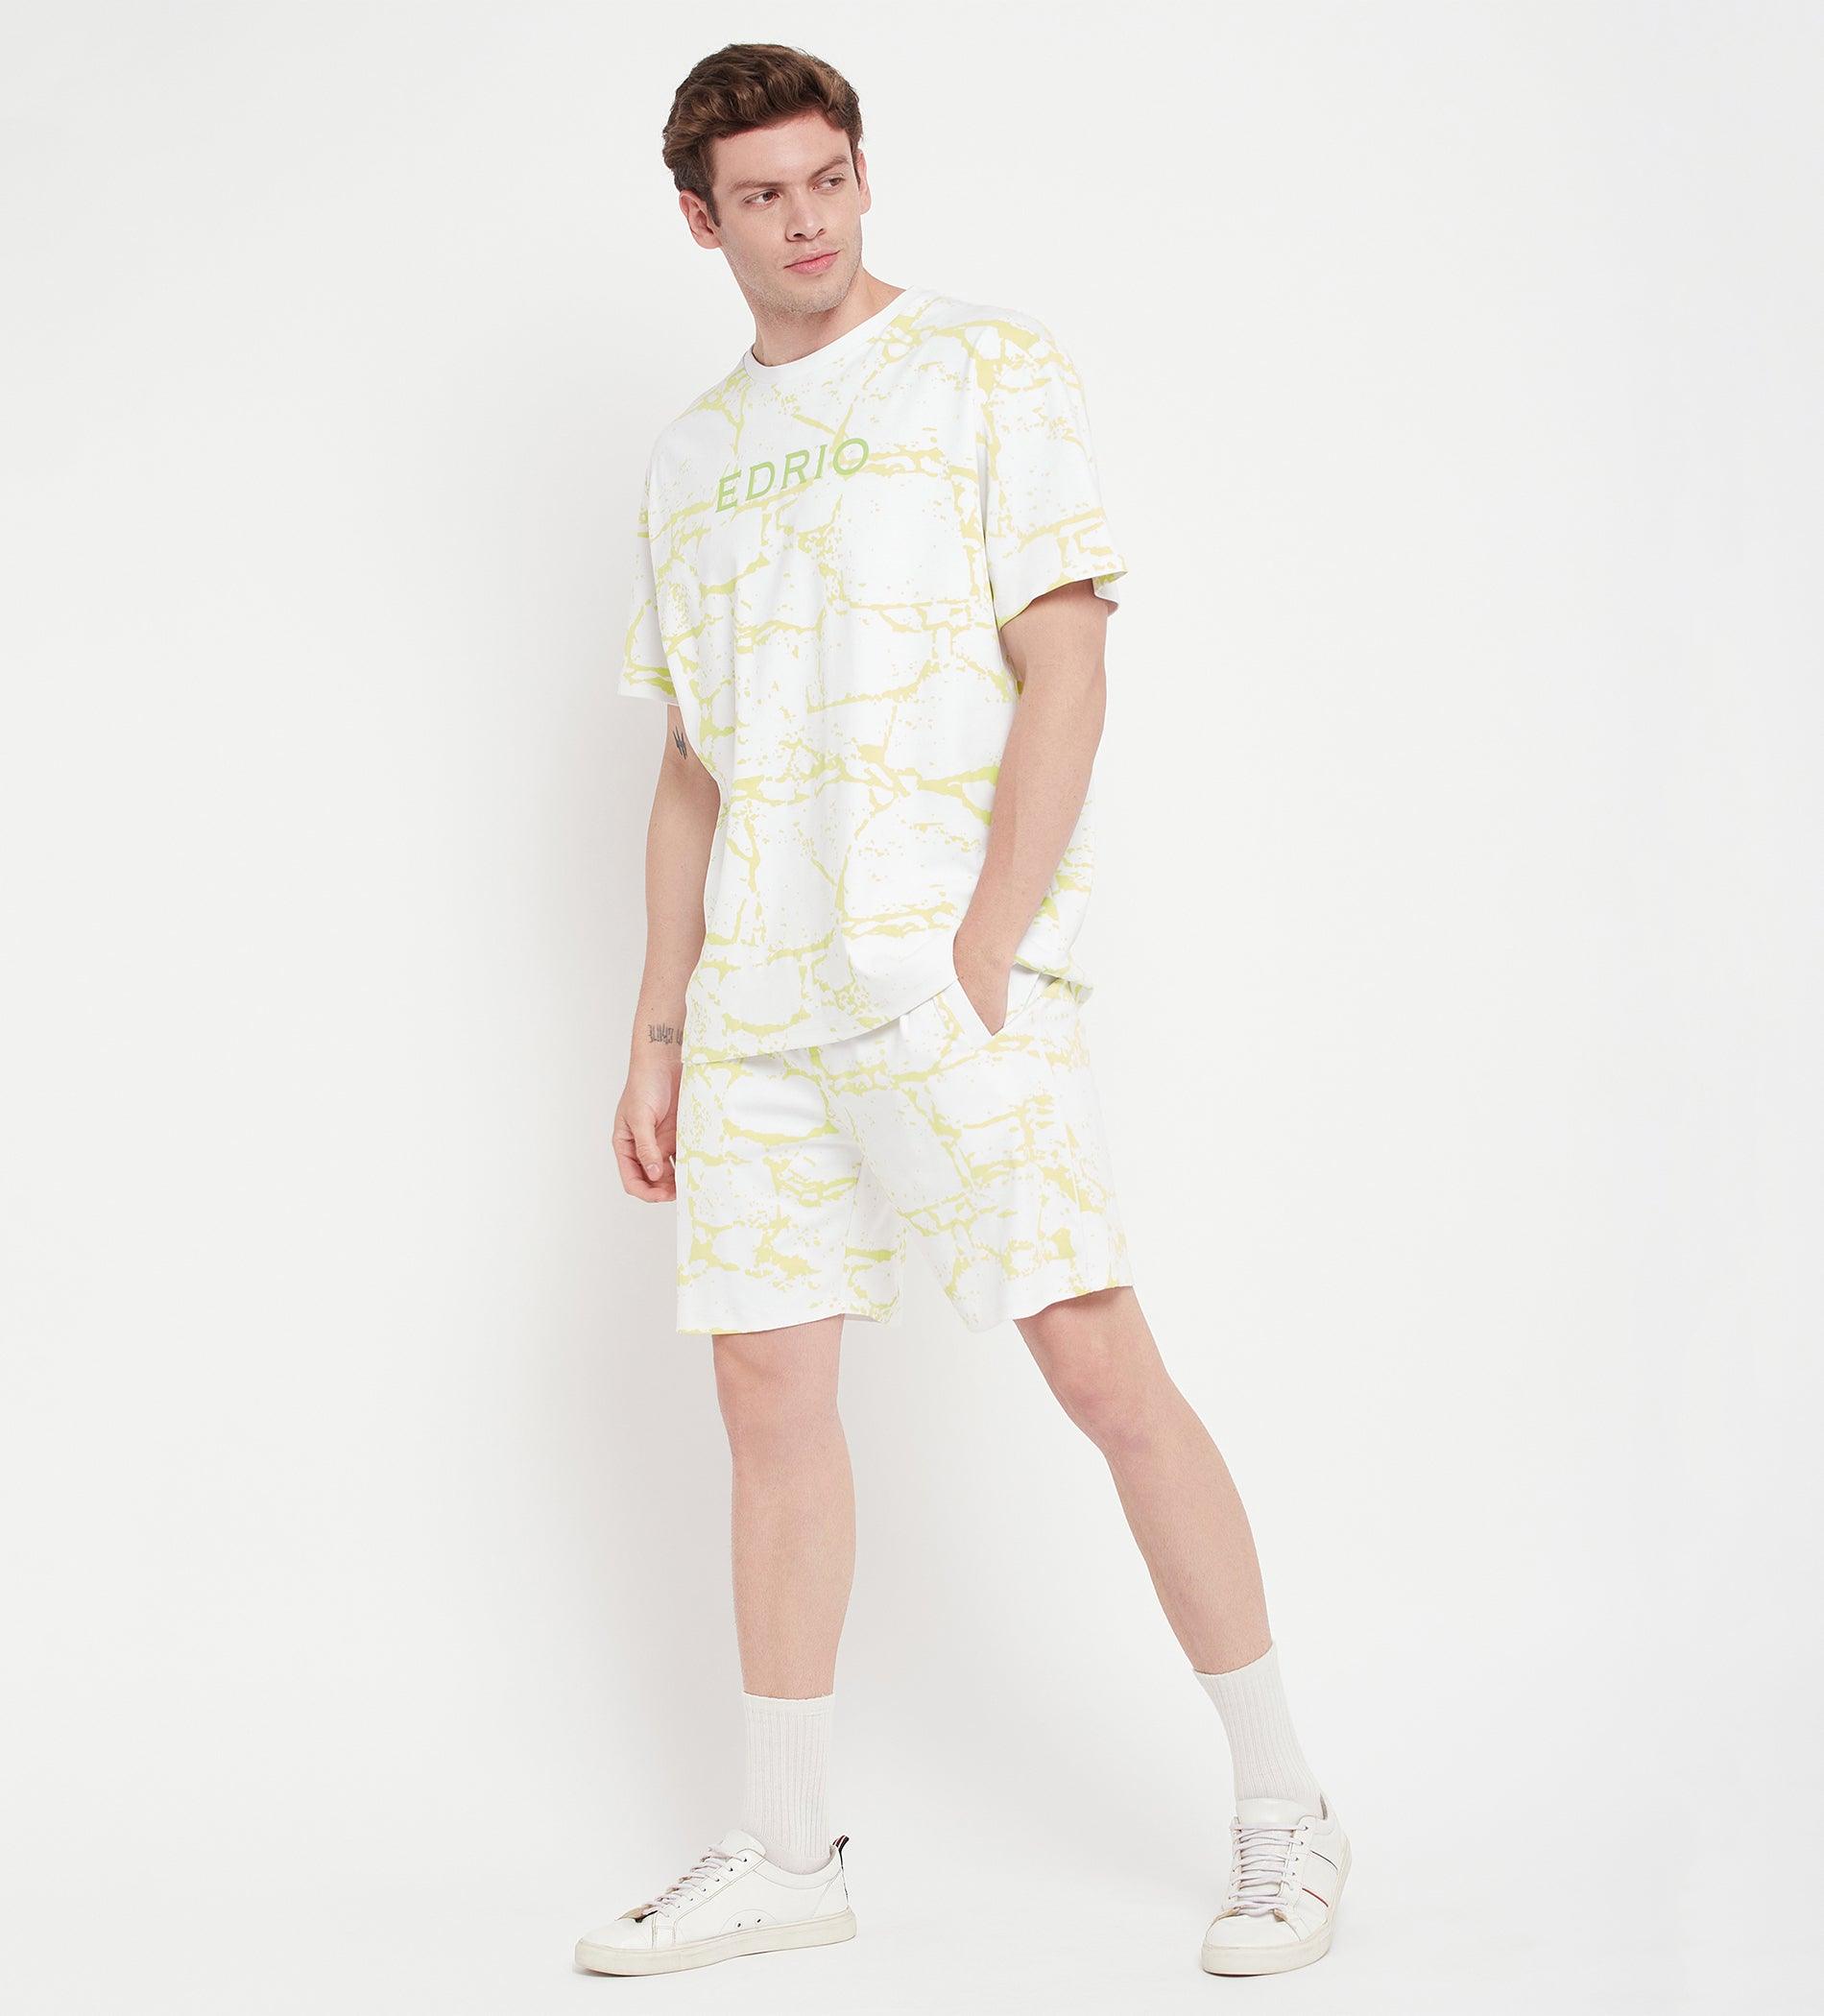 Co-ords Co-Ords Off White Textured Oversized Co-Ord & Shorts Set for Men